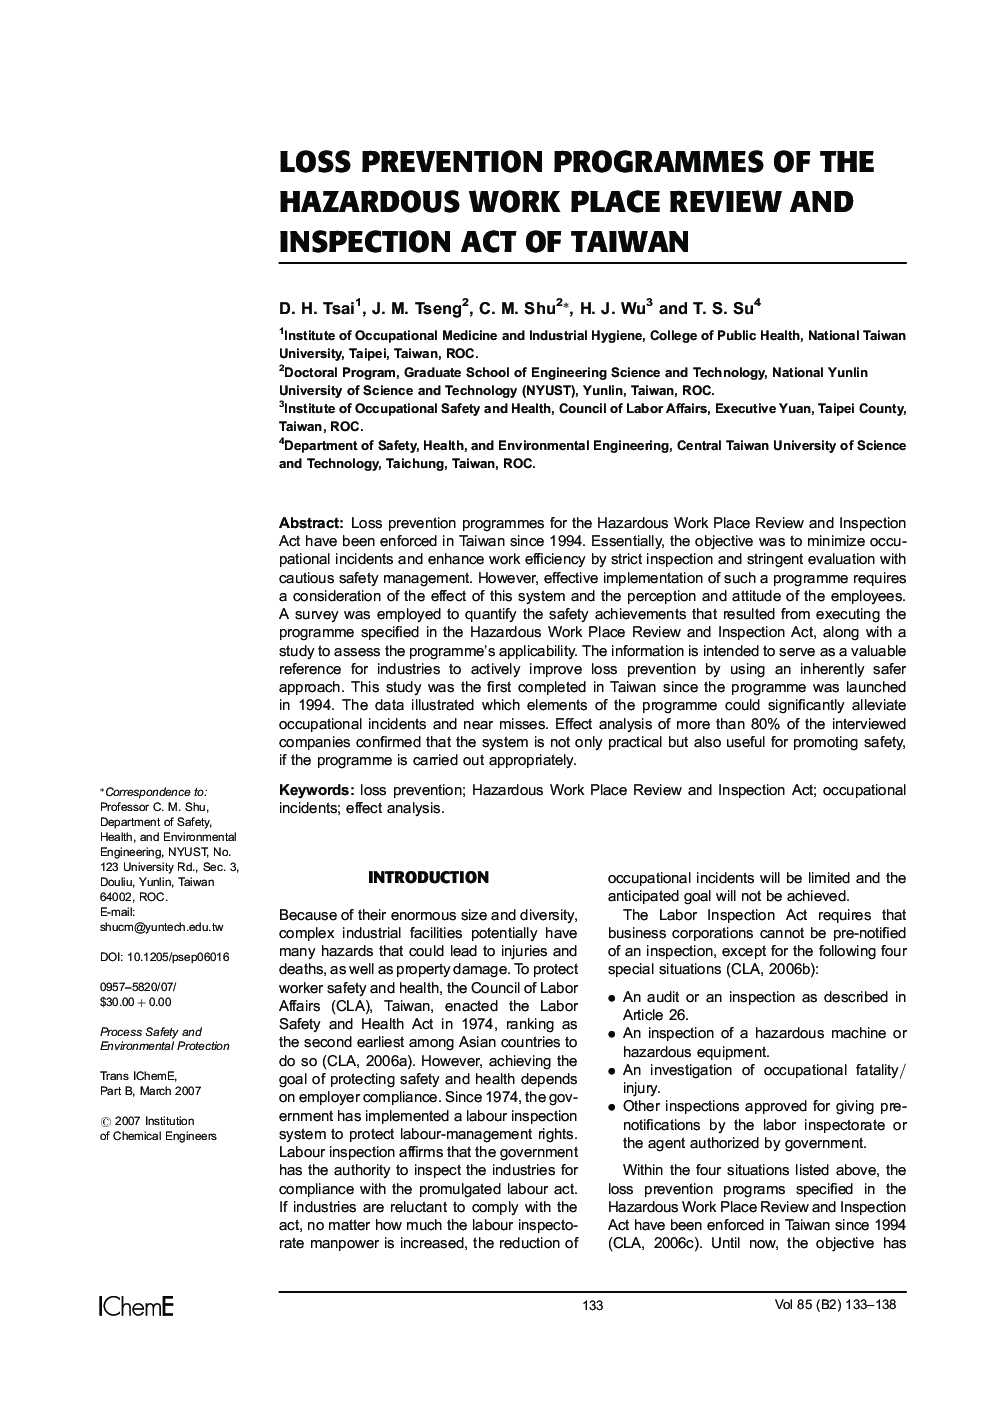 Loss Prevention Programmes of the Hazardous Work Place Review and Inspection Act of Taiwan